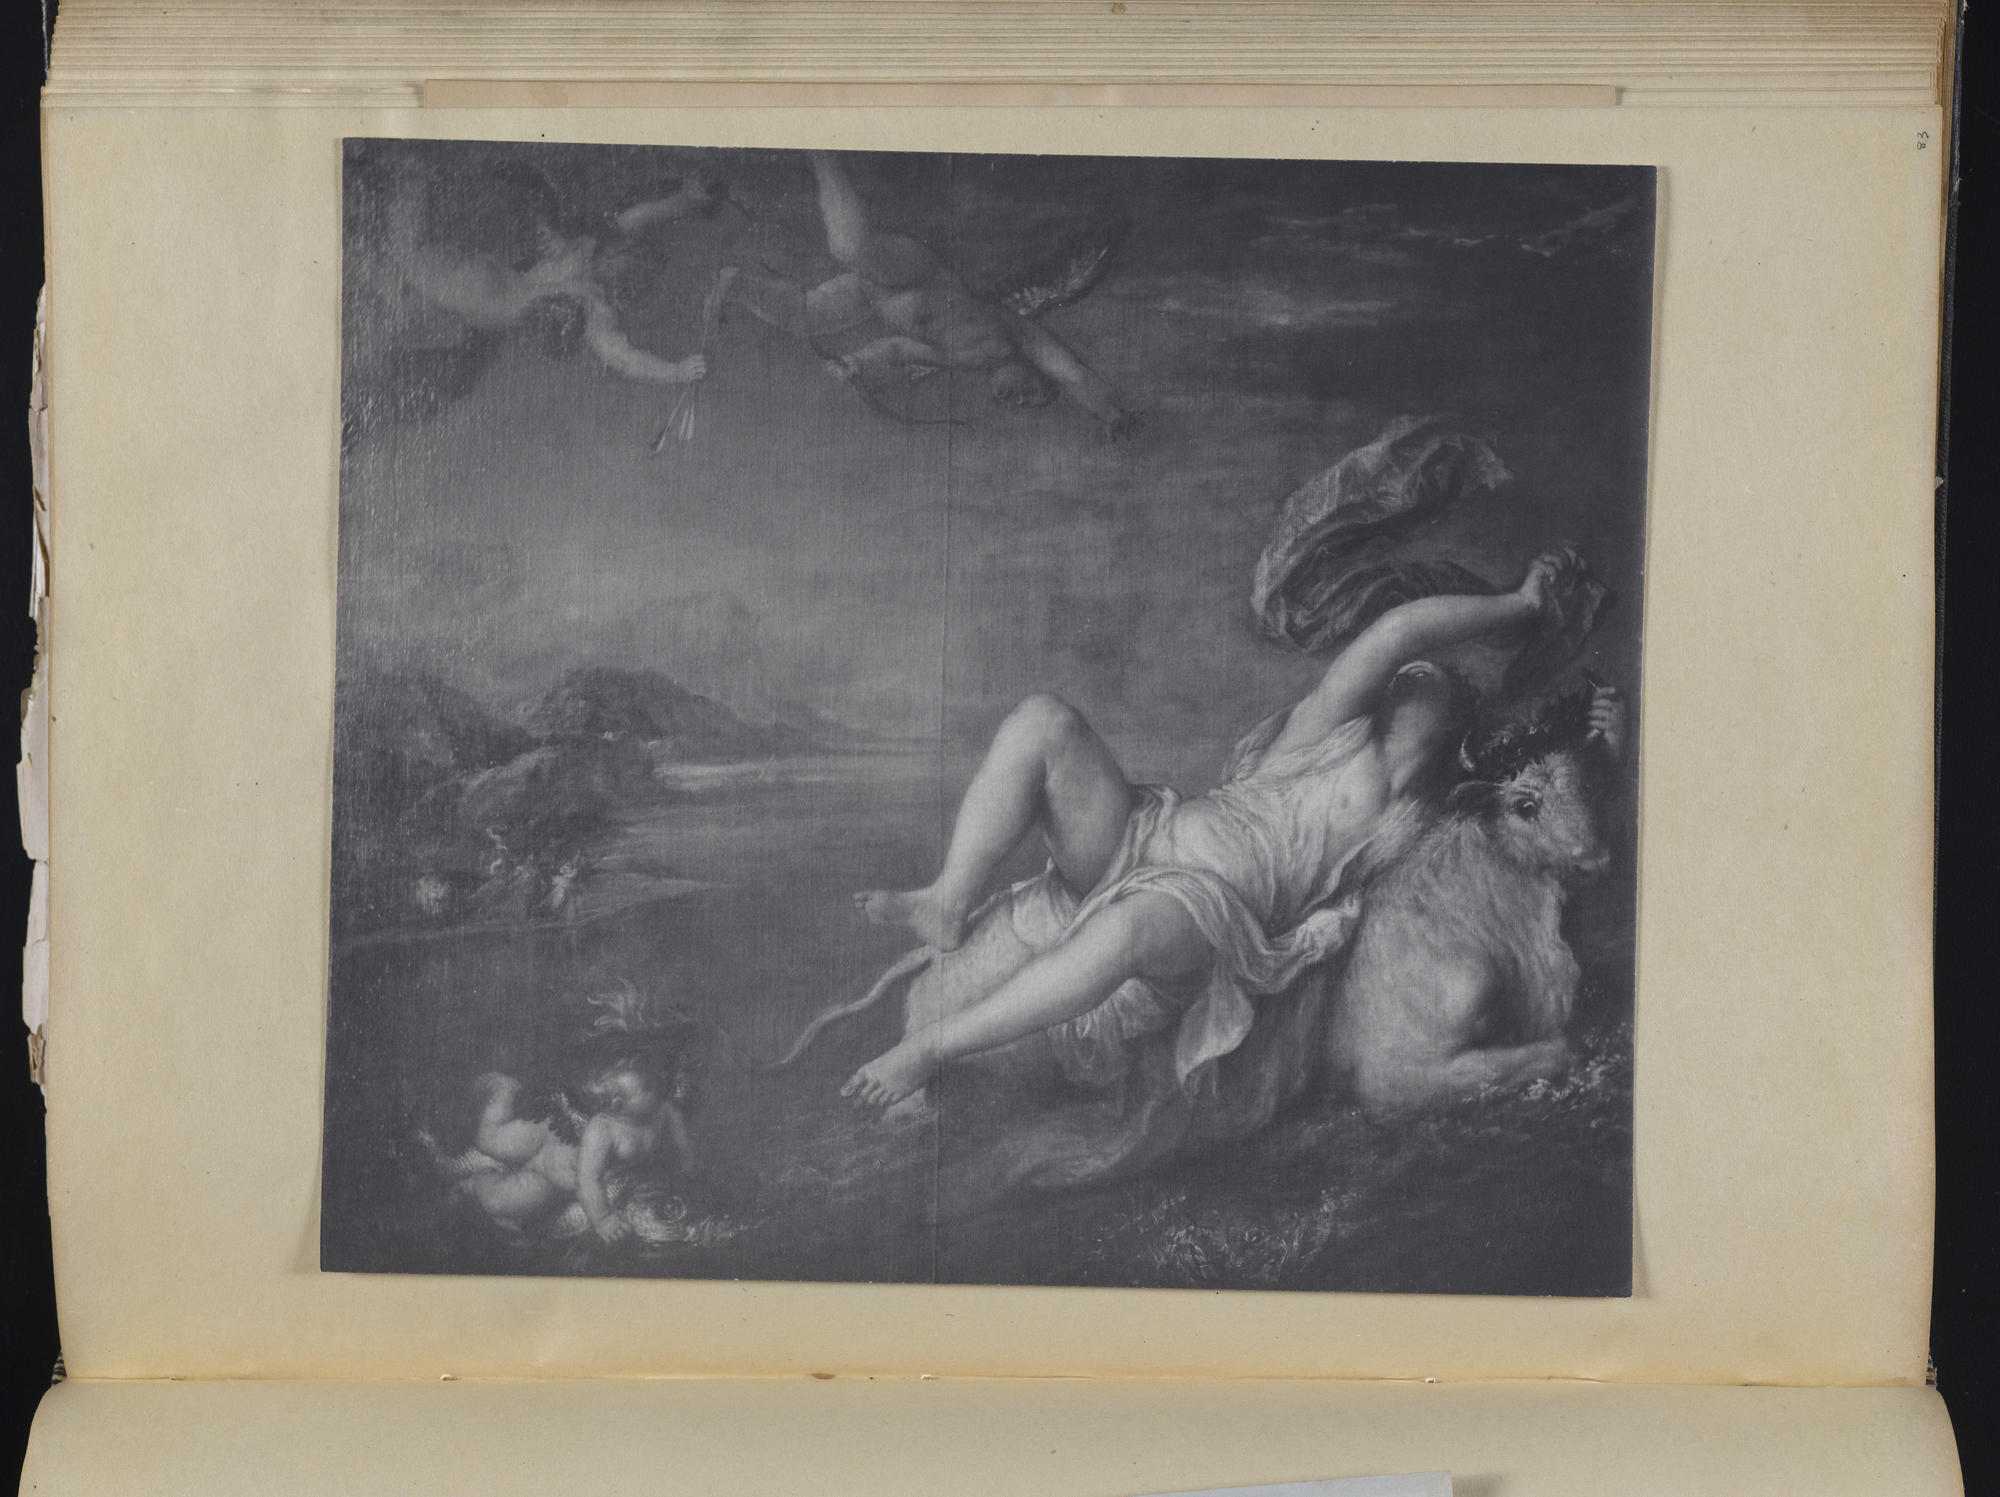 A more detailed black and white image of the Rape of Europa.